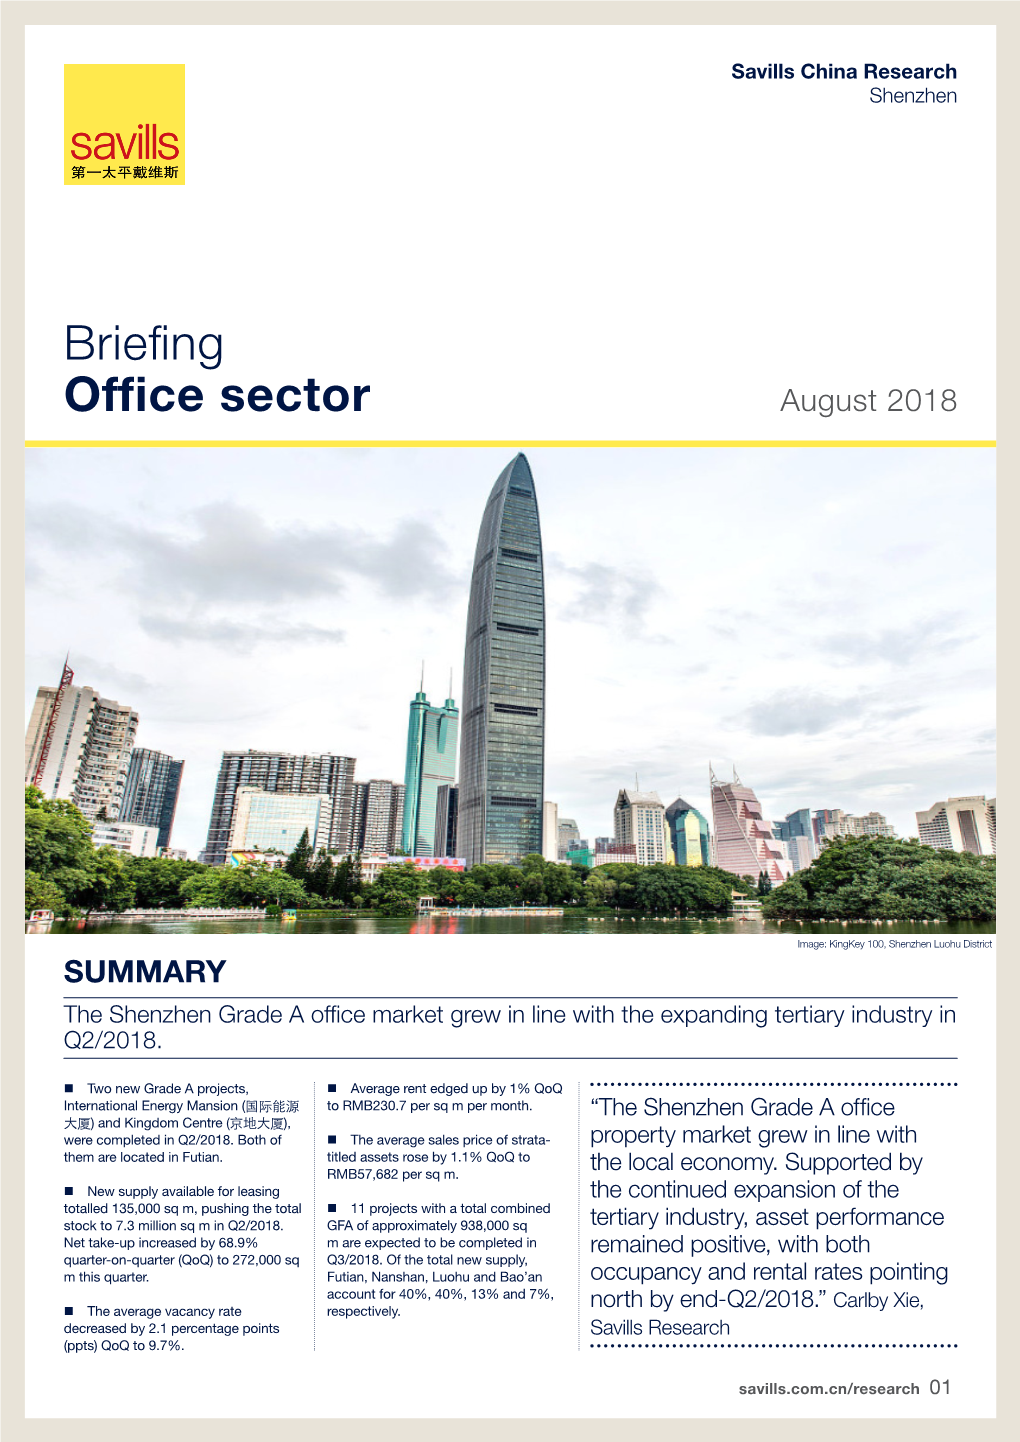 Briefing Office Sector August 2018